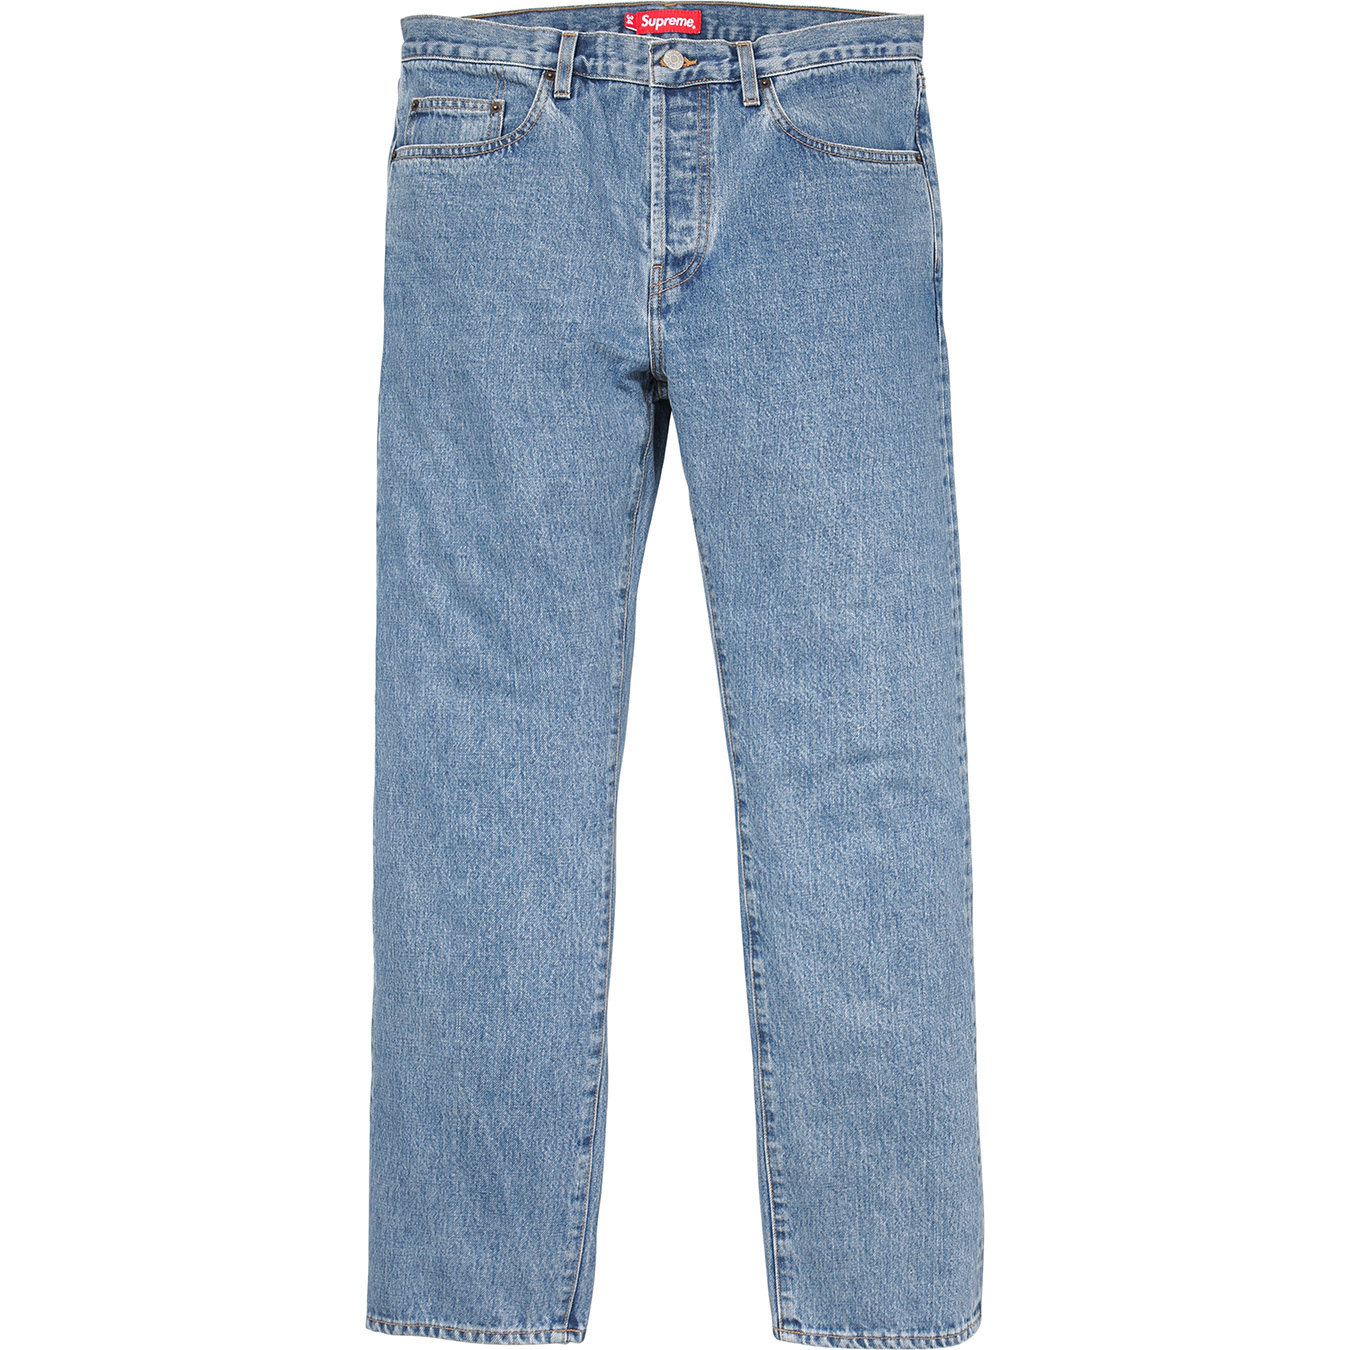 Stone Washed Slim Jeans - fall winter 2017 - Supreme